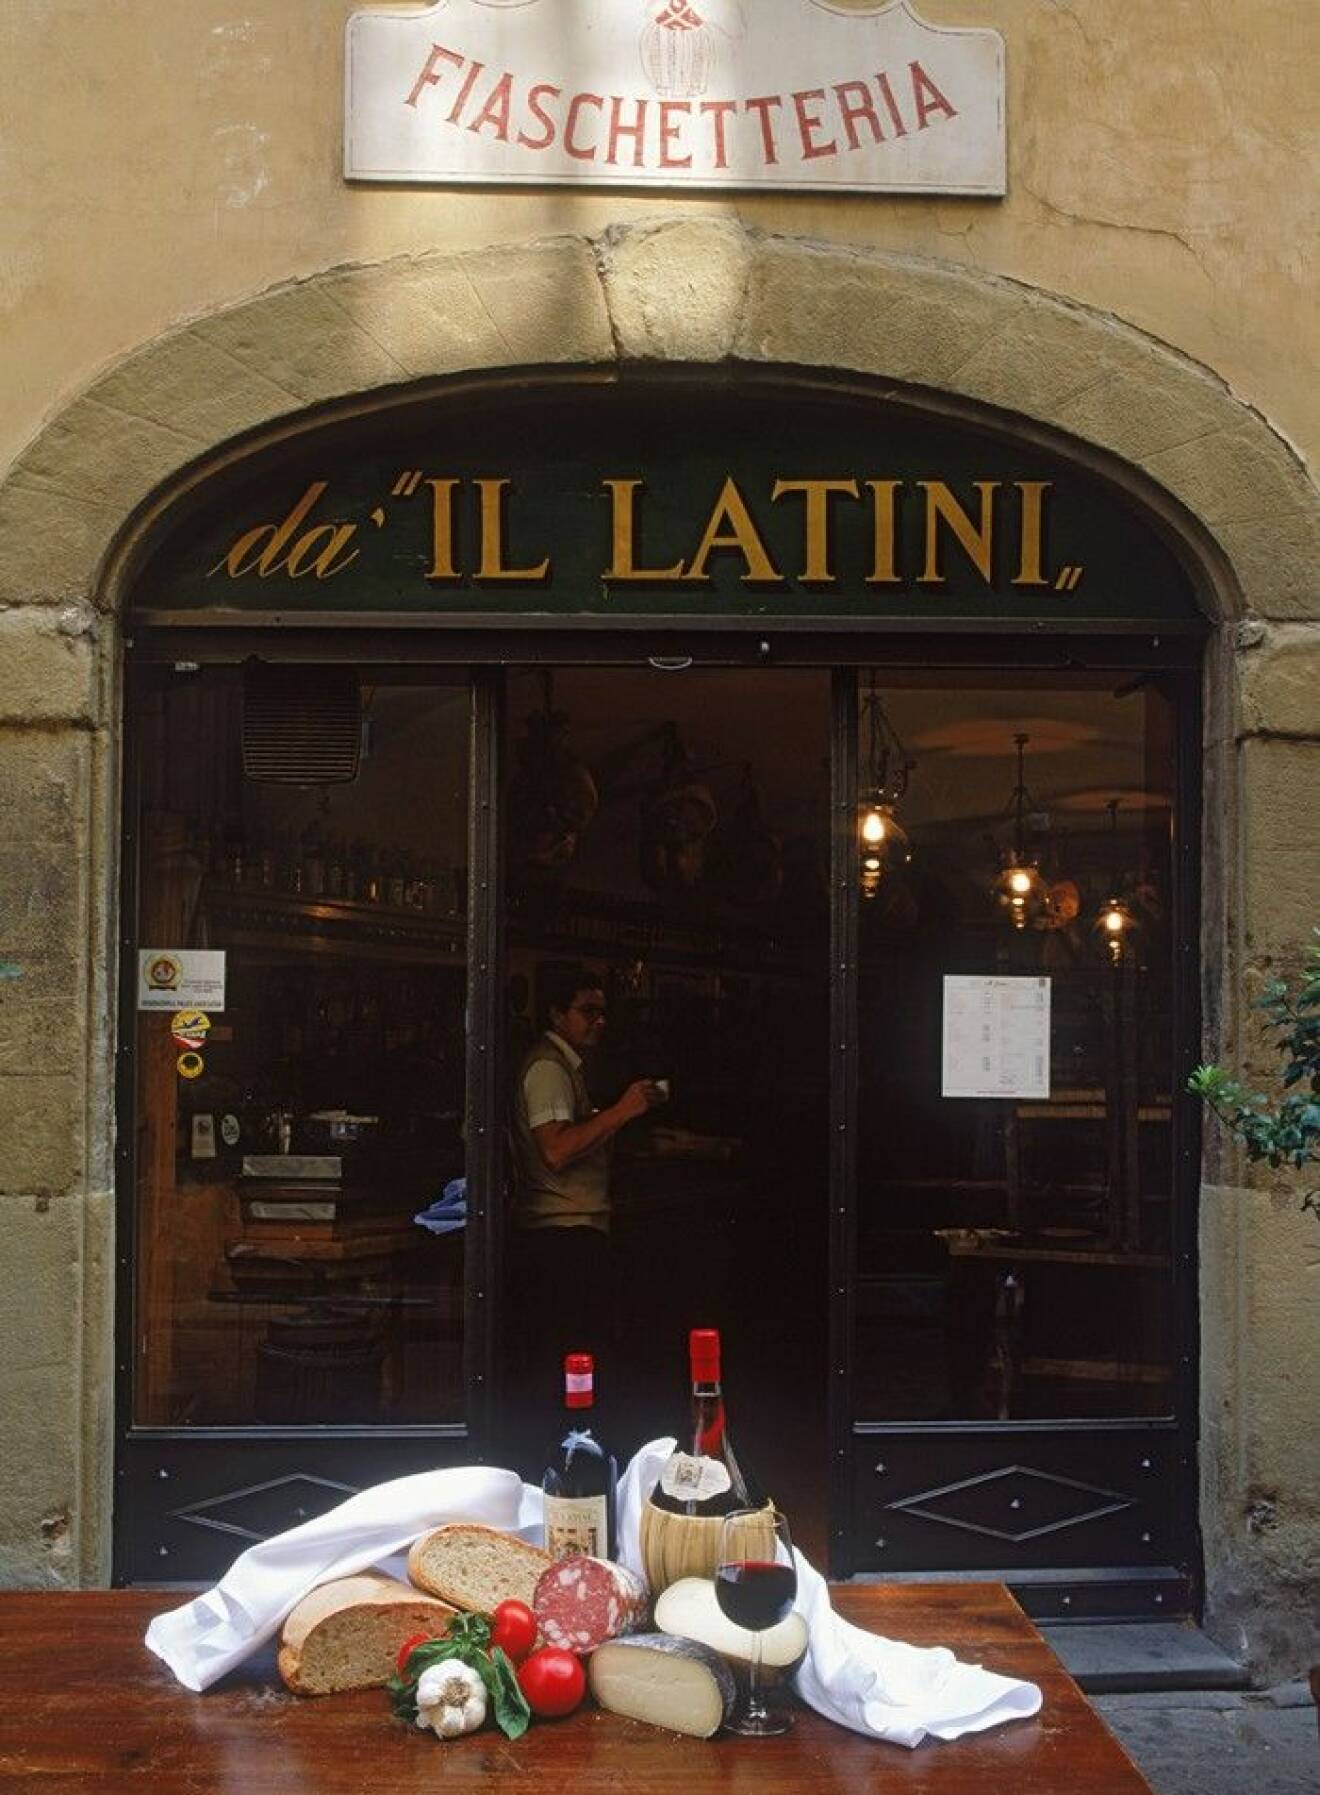 Food and wines of Tuscany outside Il Latini restaurant in Florence